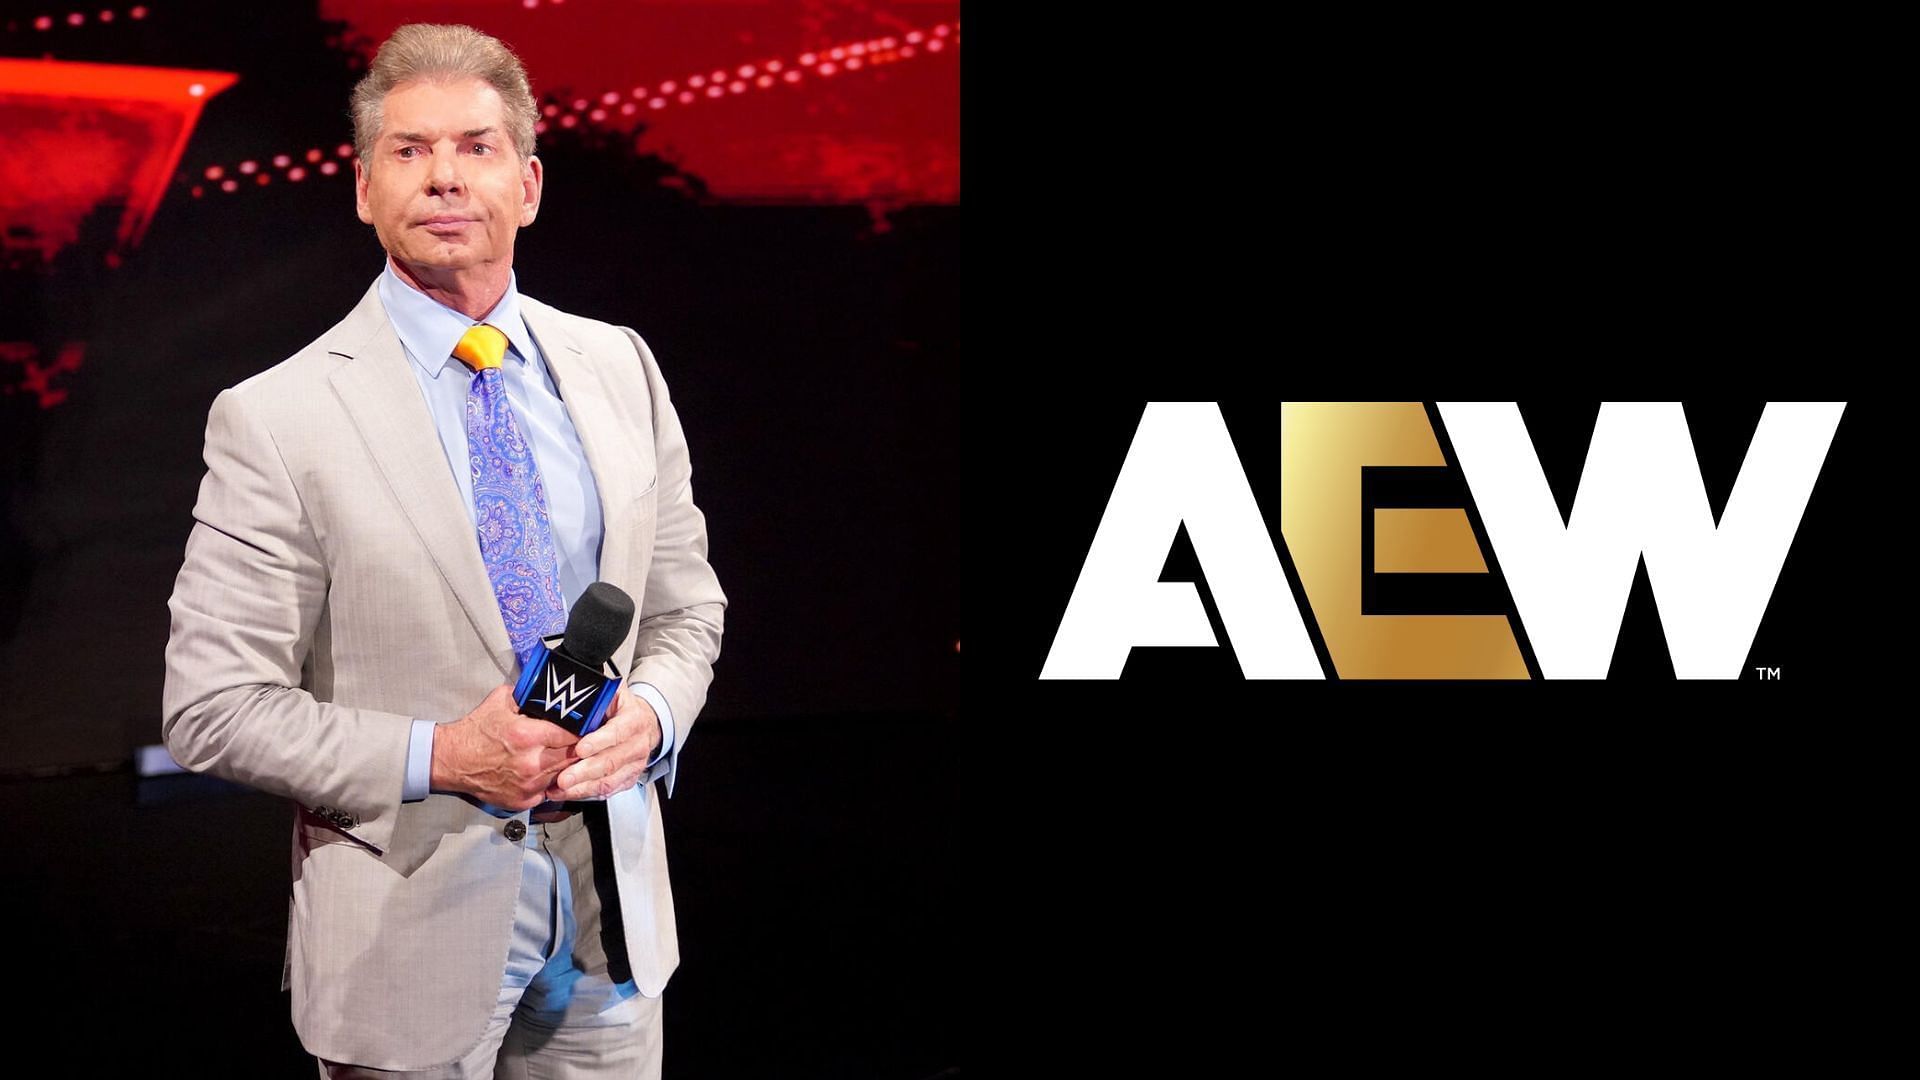 Vince McMahon is the founder of WWE [Photo courtesy of WWE